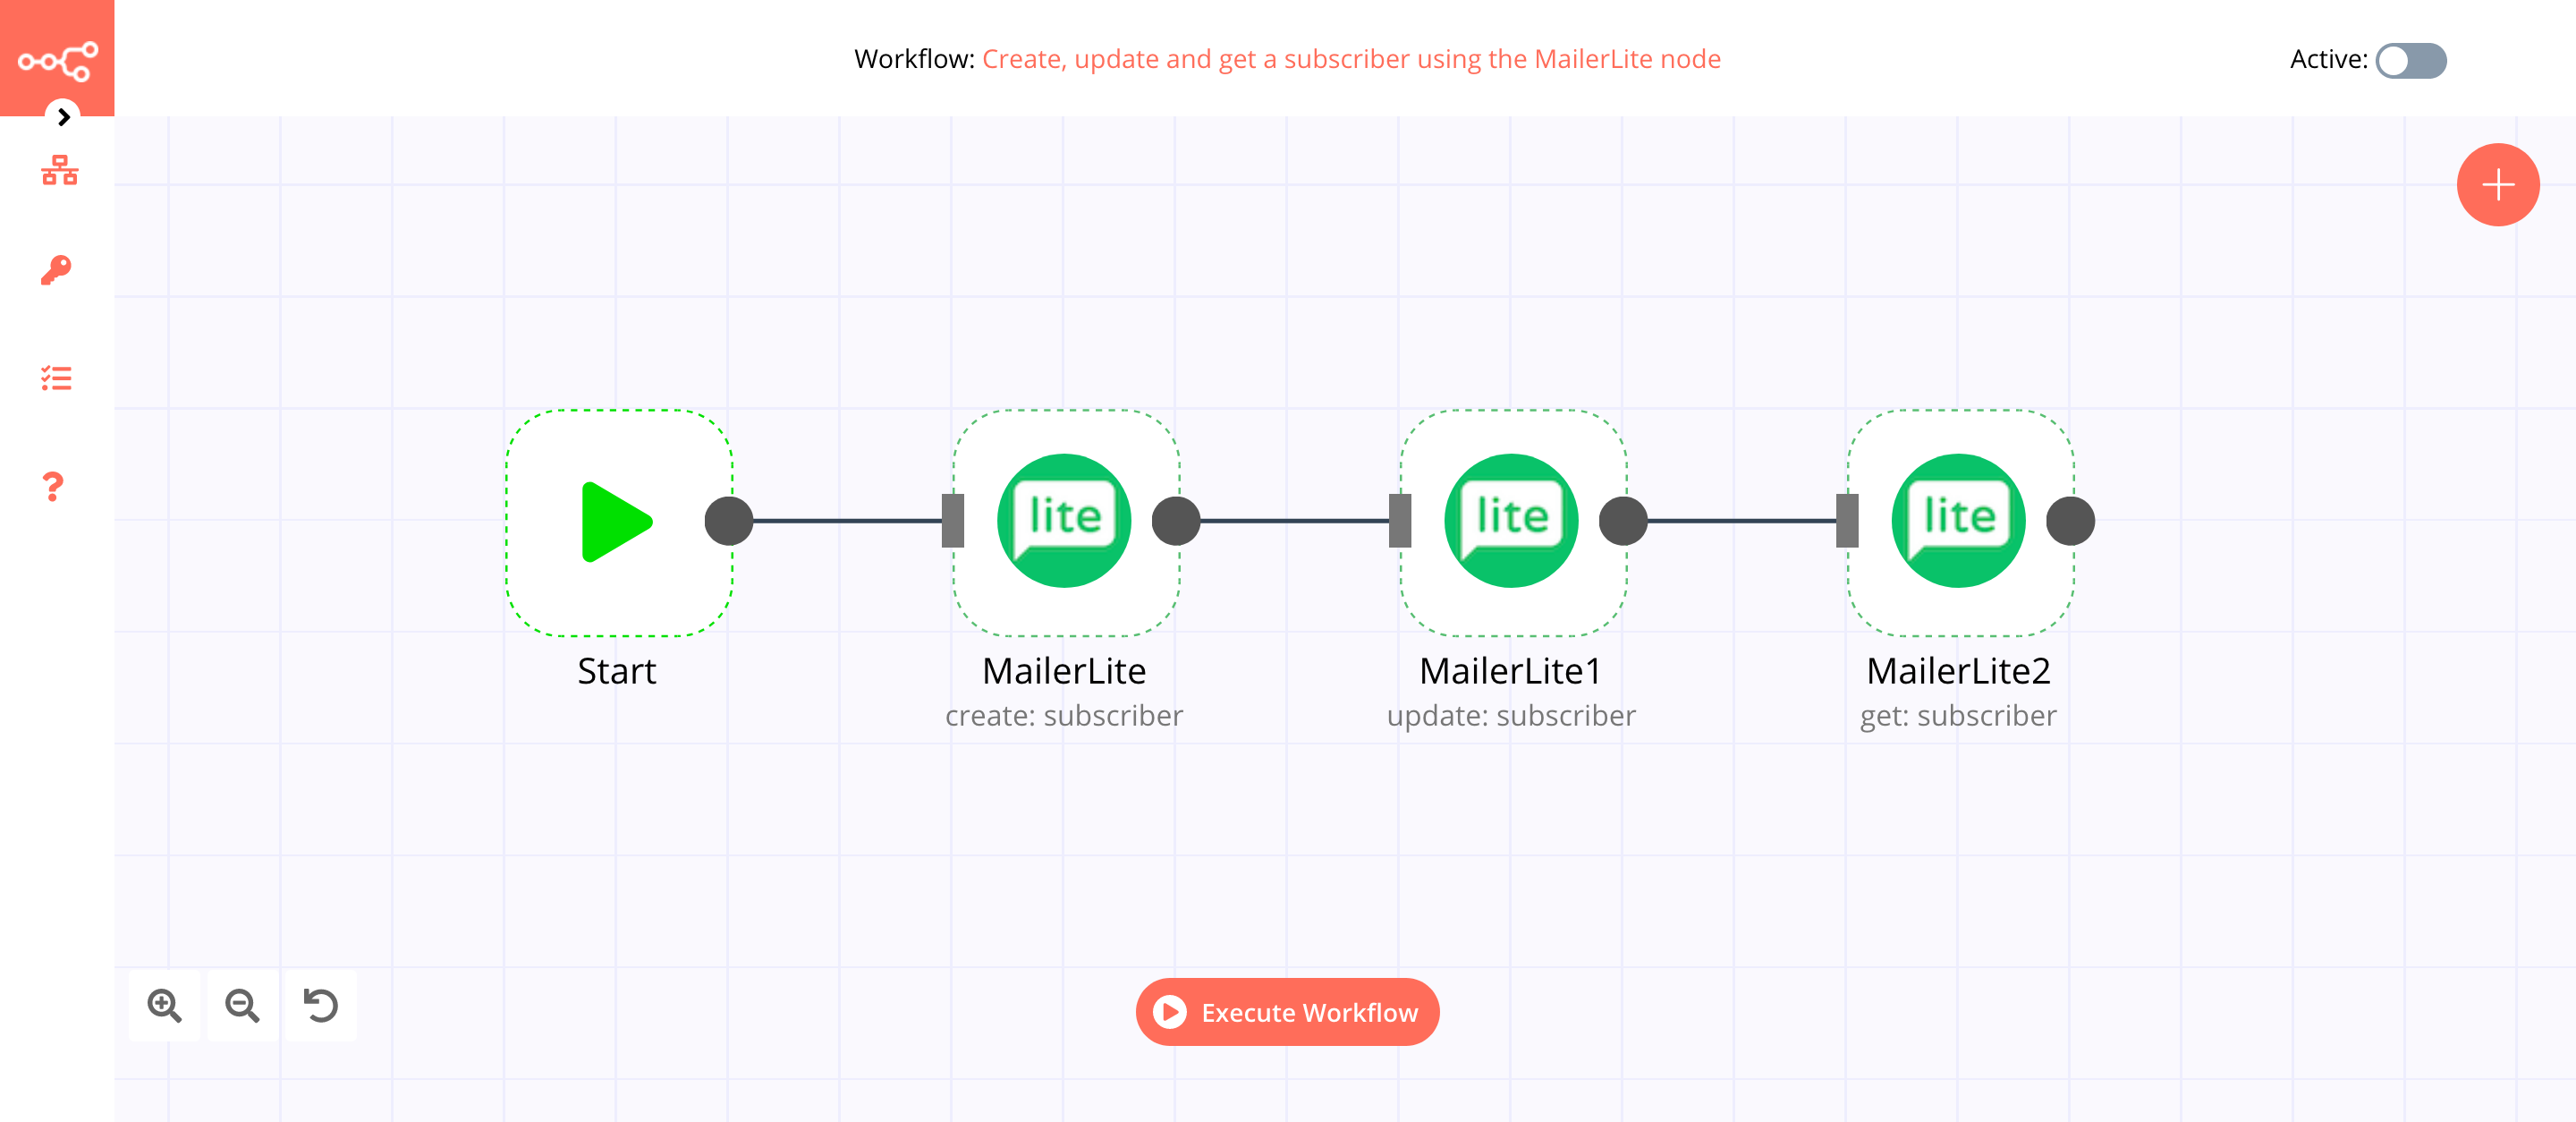 A workflow with the MailerLite node